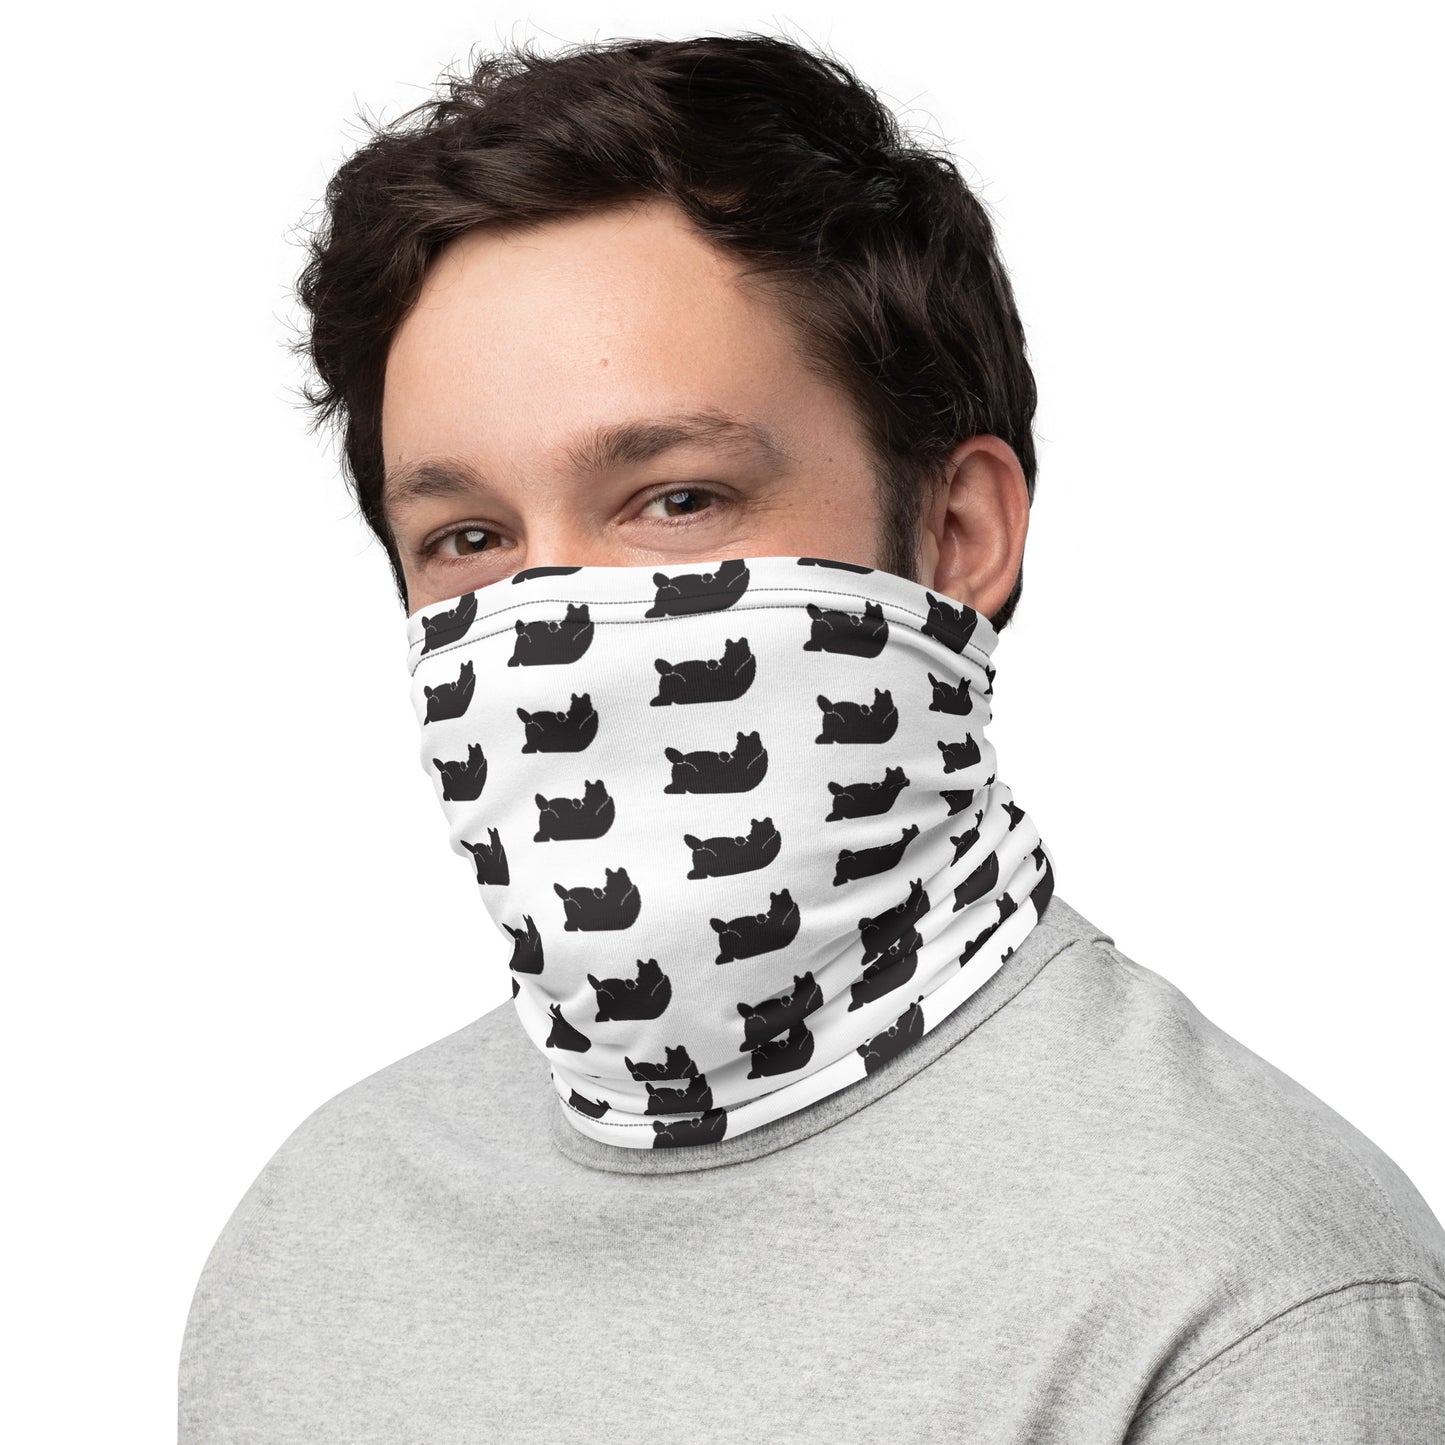 Lazy Bear Outfitters' Neck Gaiter